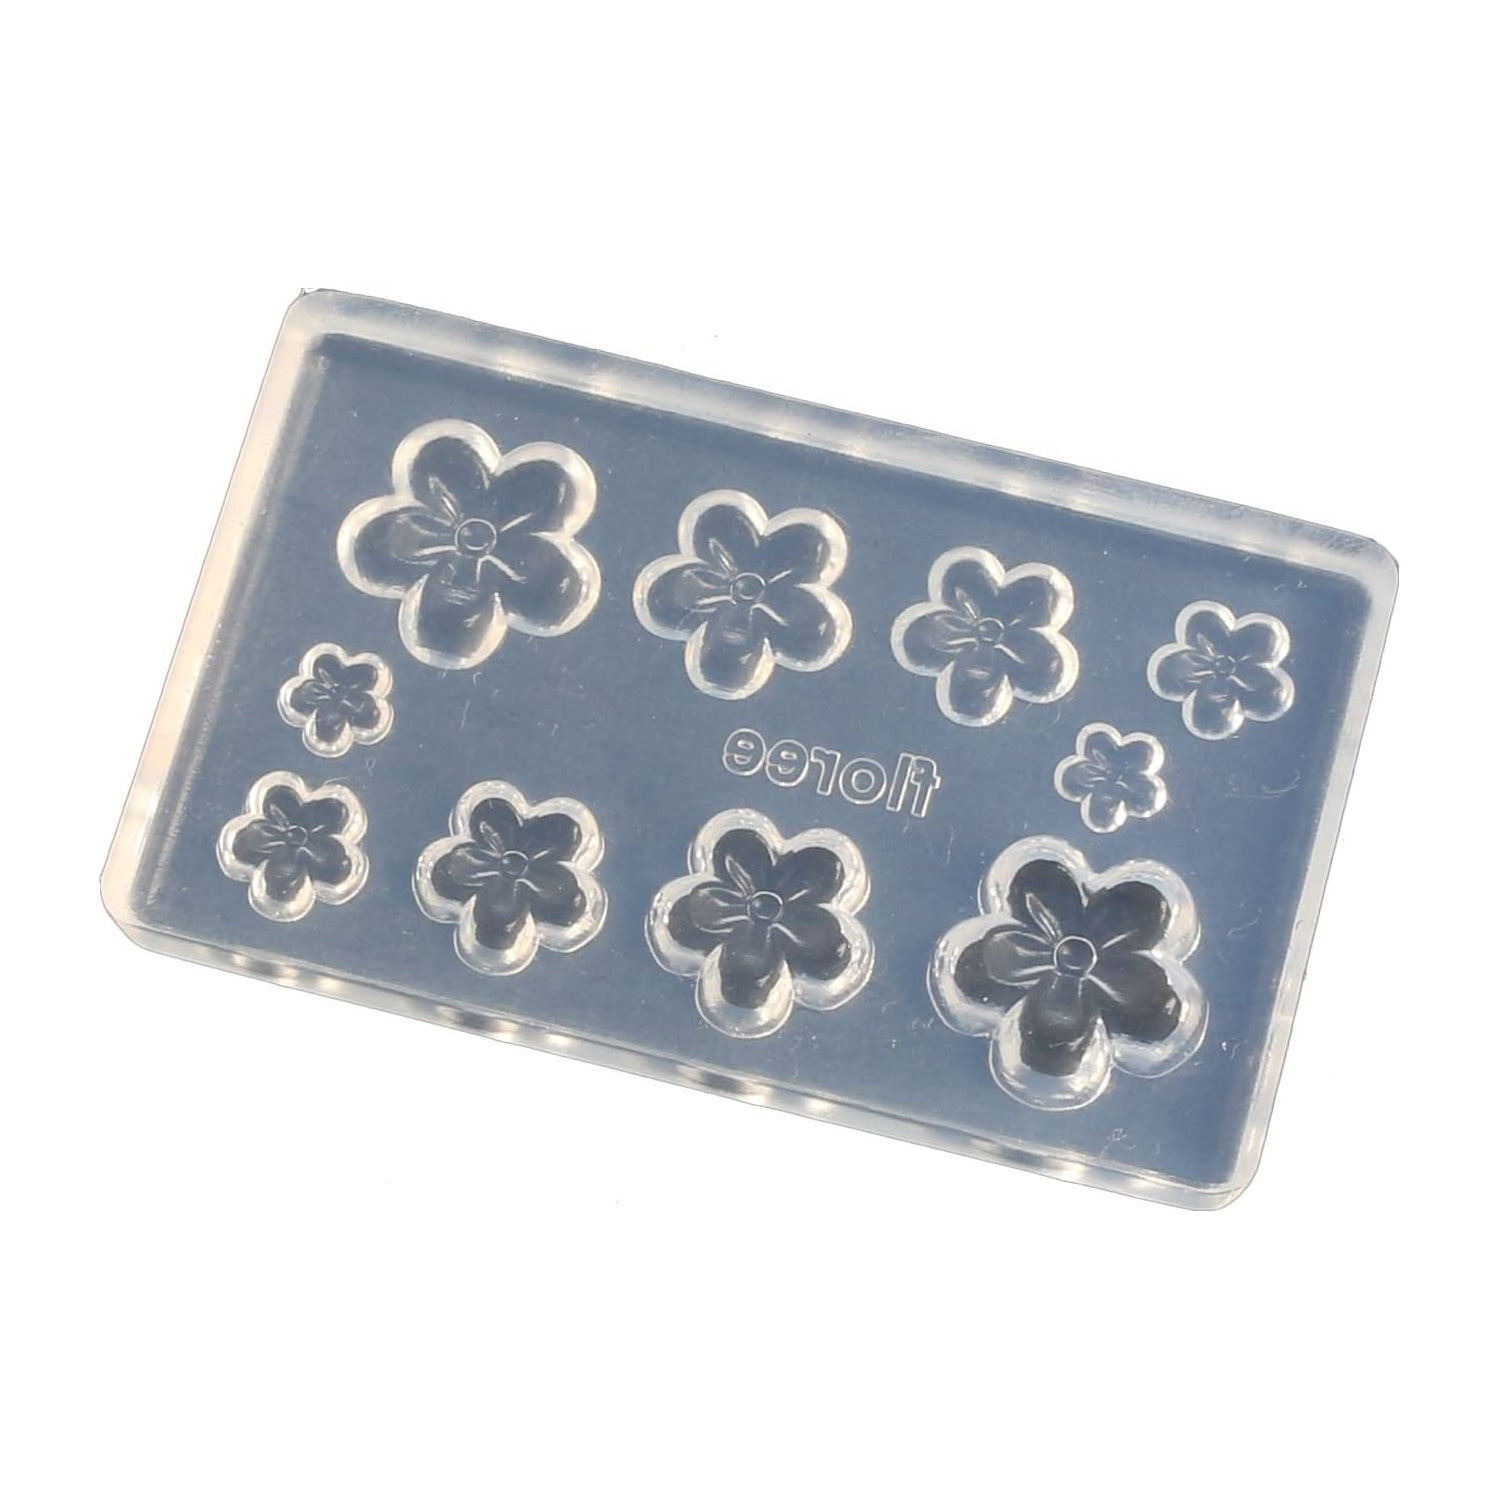 KAM-REJ-401 Resin Crafting Silicone Mold (pcs)